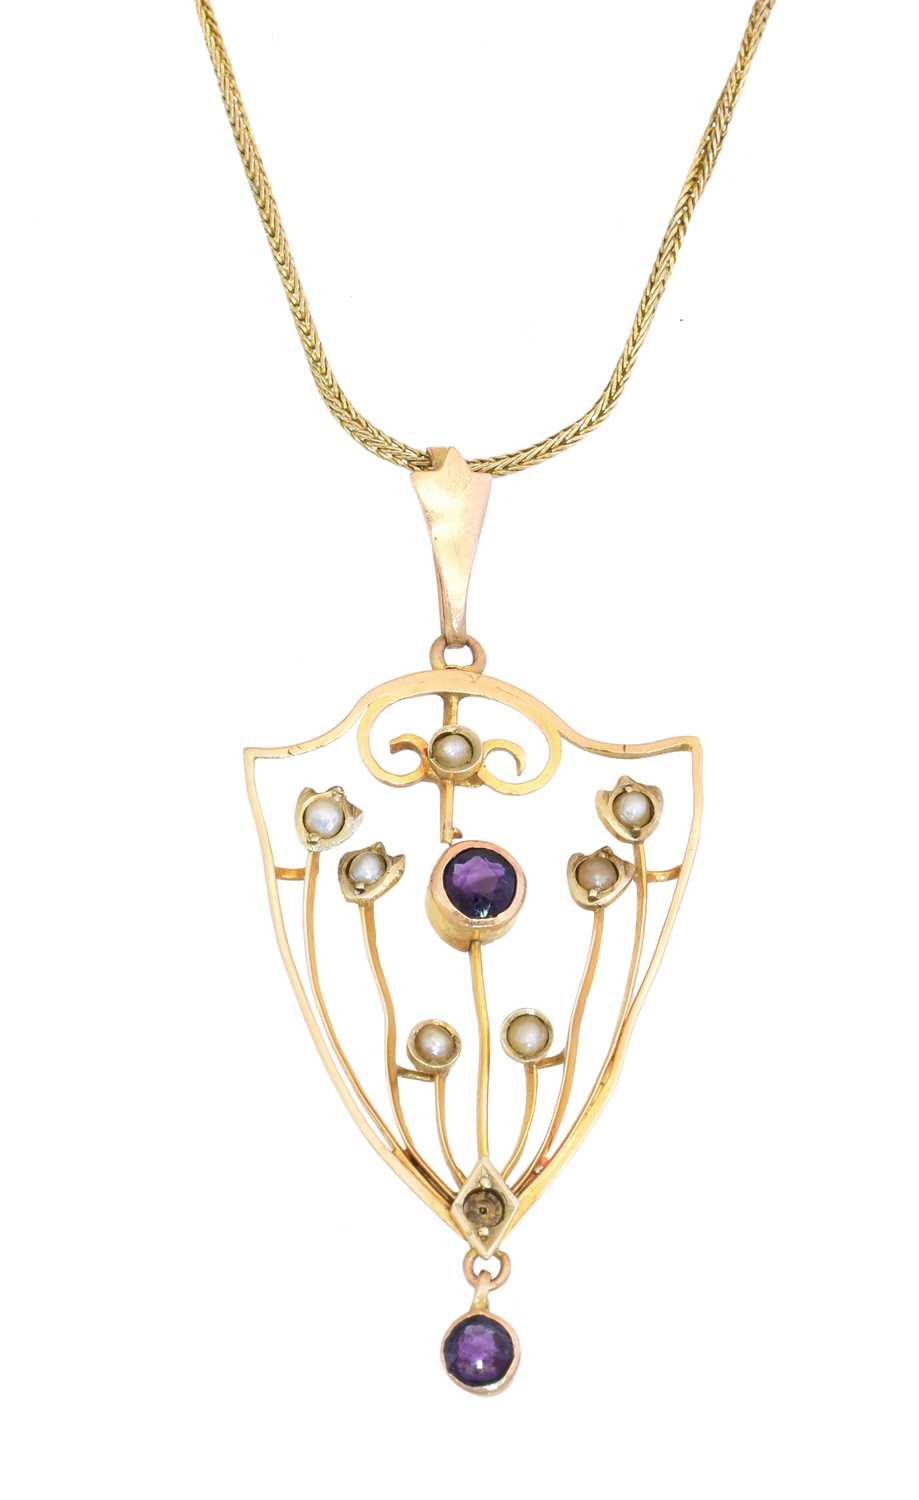 Lot 34 - An early 20th century amethyst and seed pearl pendant